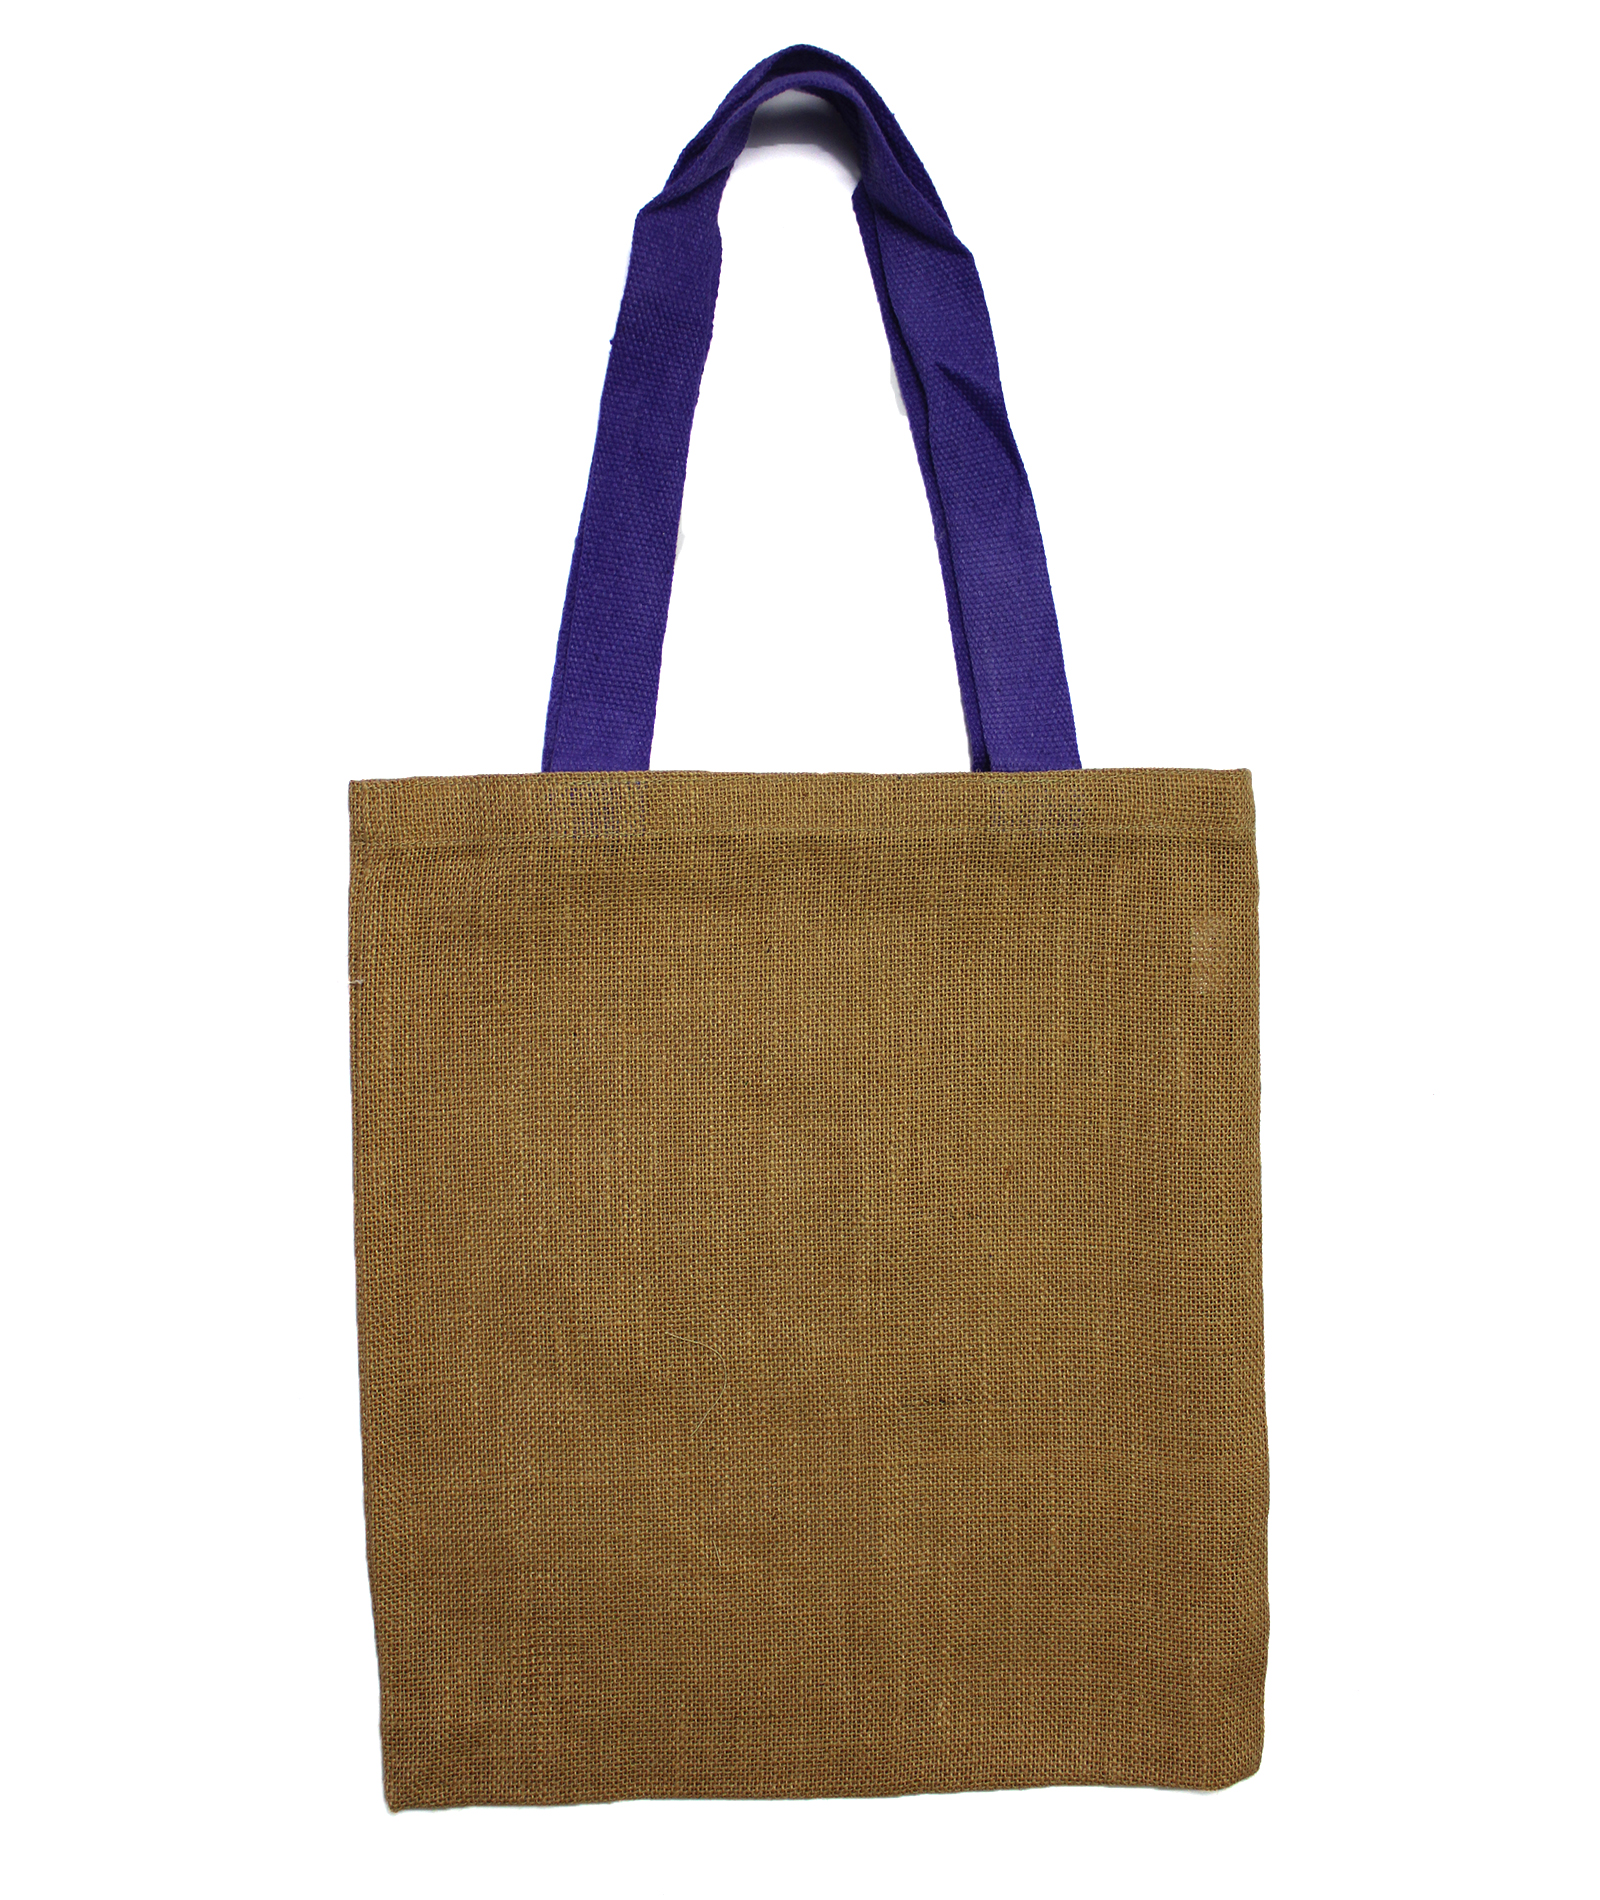 Wholesale Bags & Accessories - Ancient Wisdom Giftware Supplier